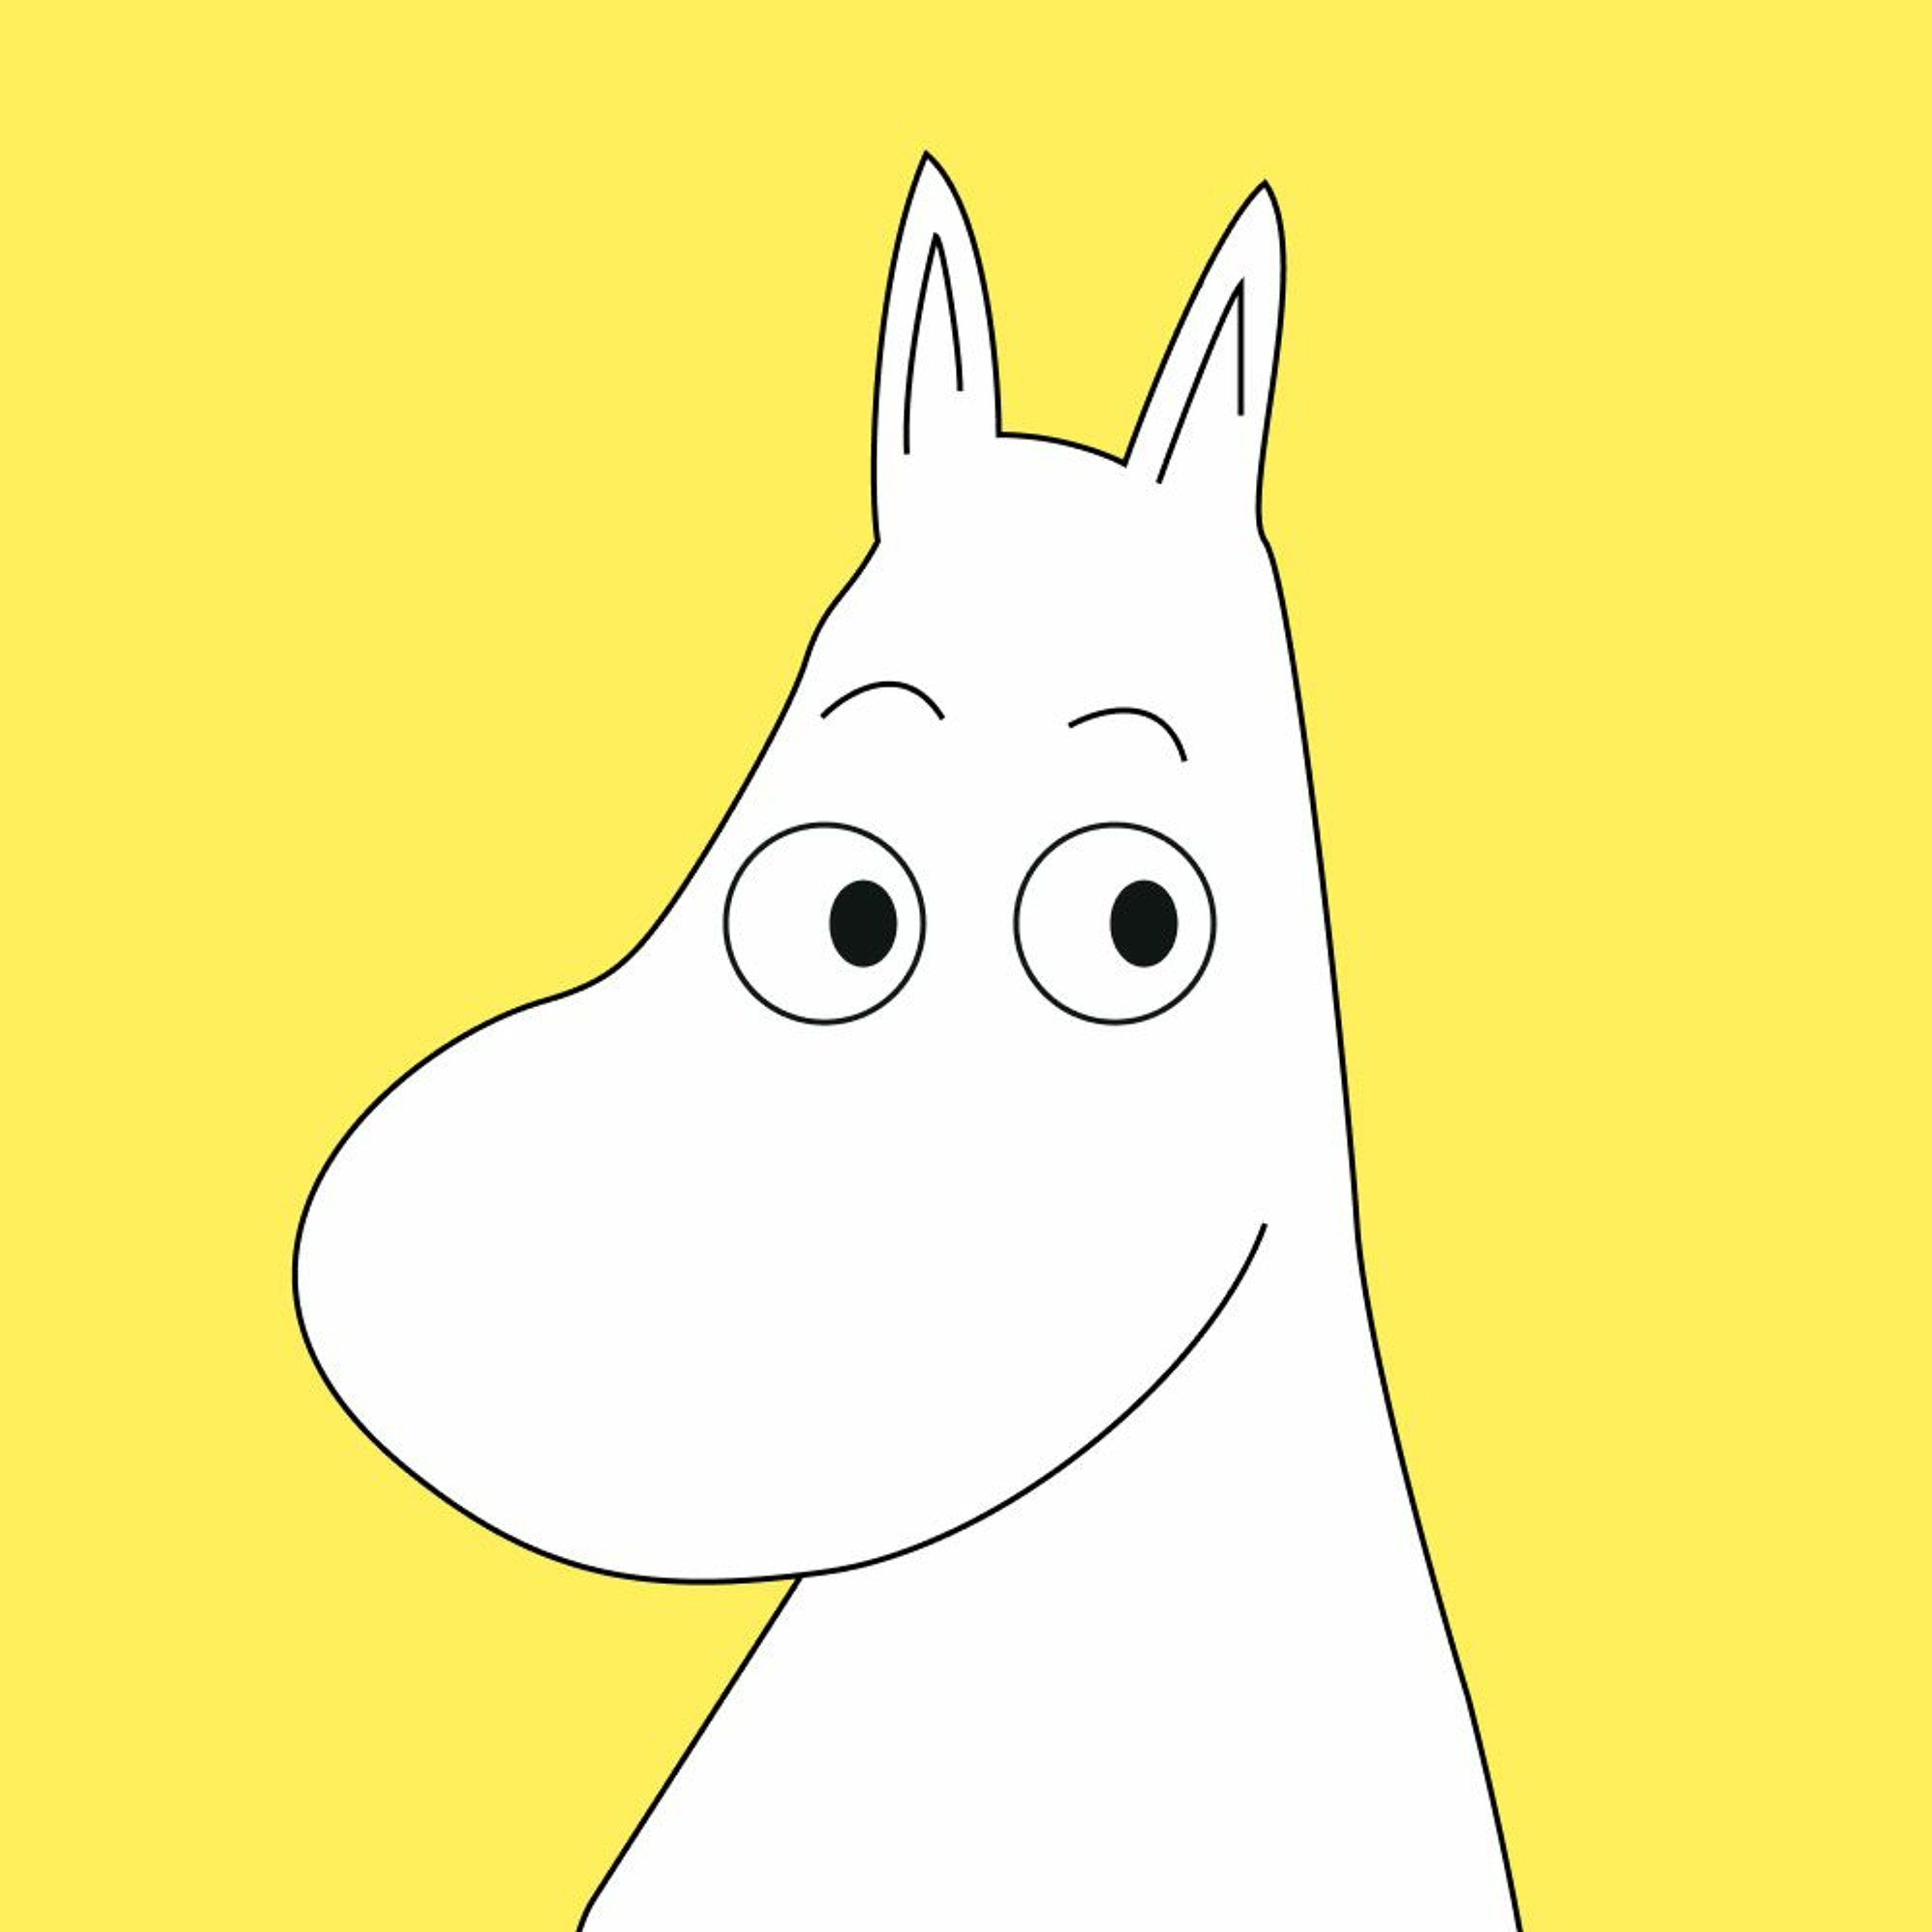 Podquisition 480: Unexpected Moomin